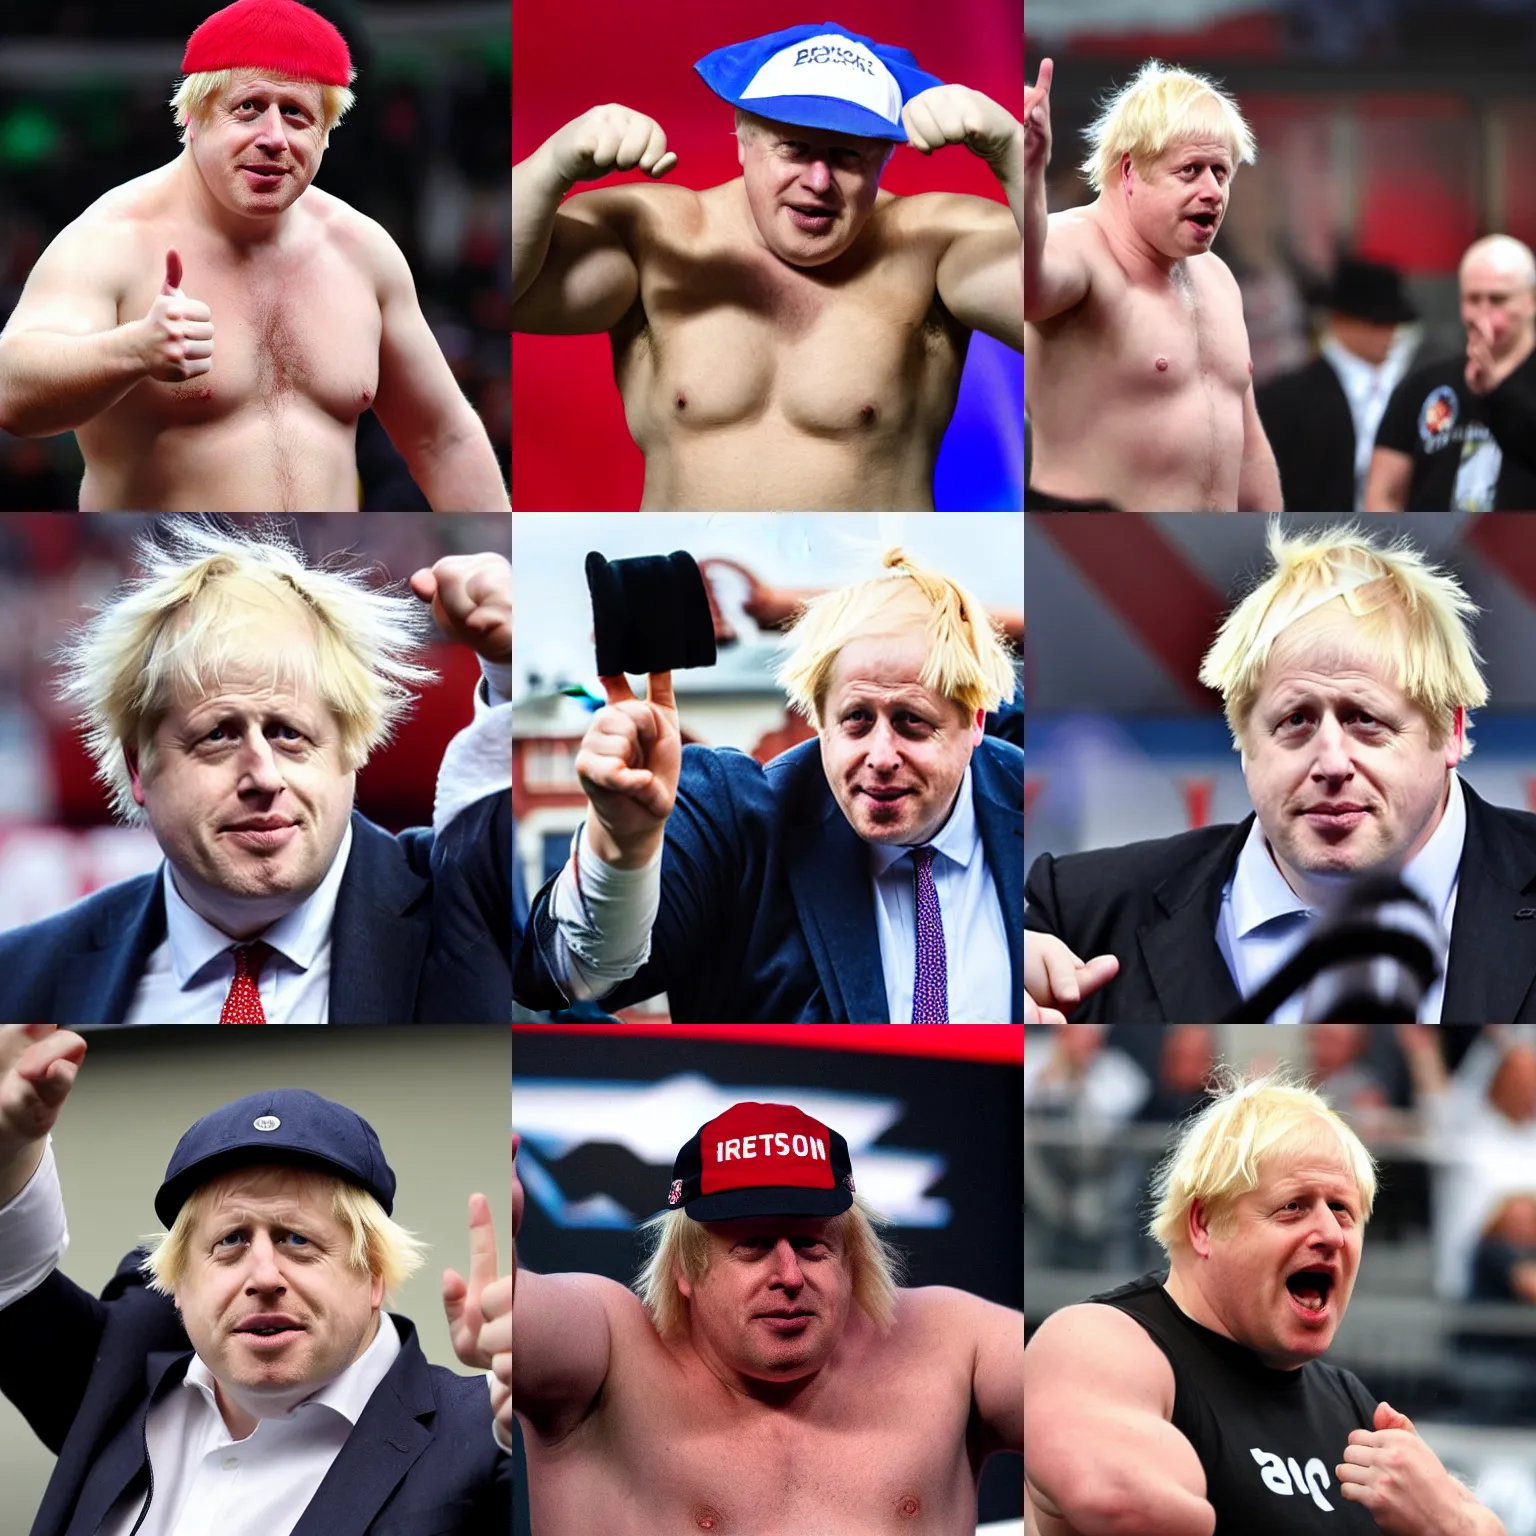 Prompt: boris johnson as a muscular wwe wrestler wearing a cap hat. he is angry and waving hello to the camera